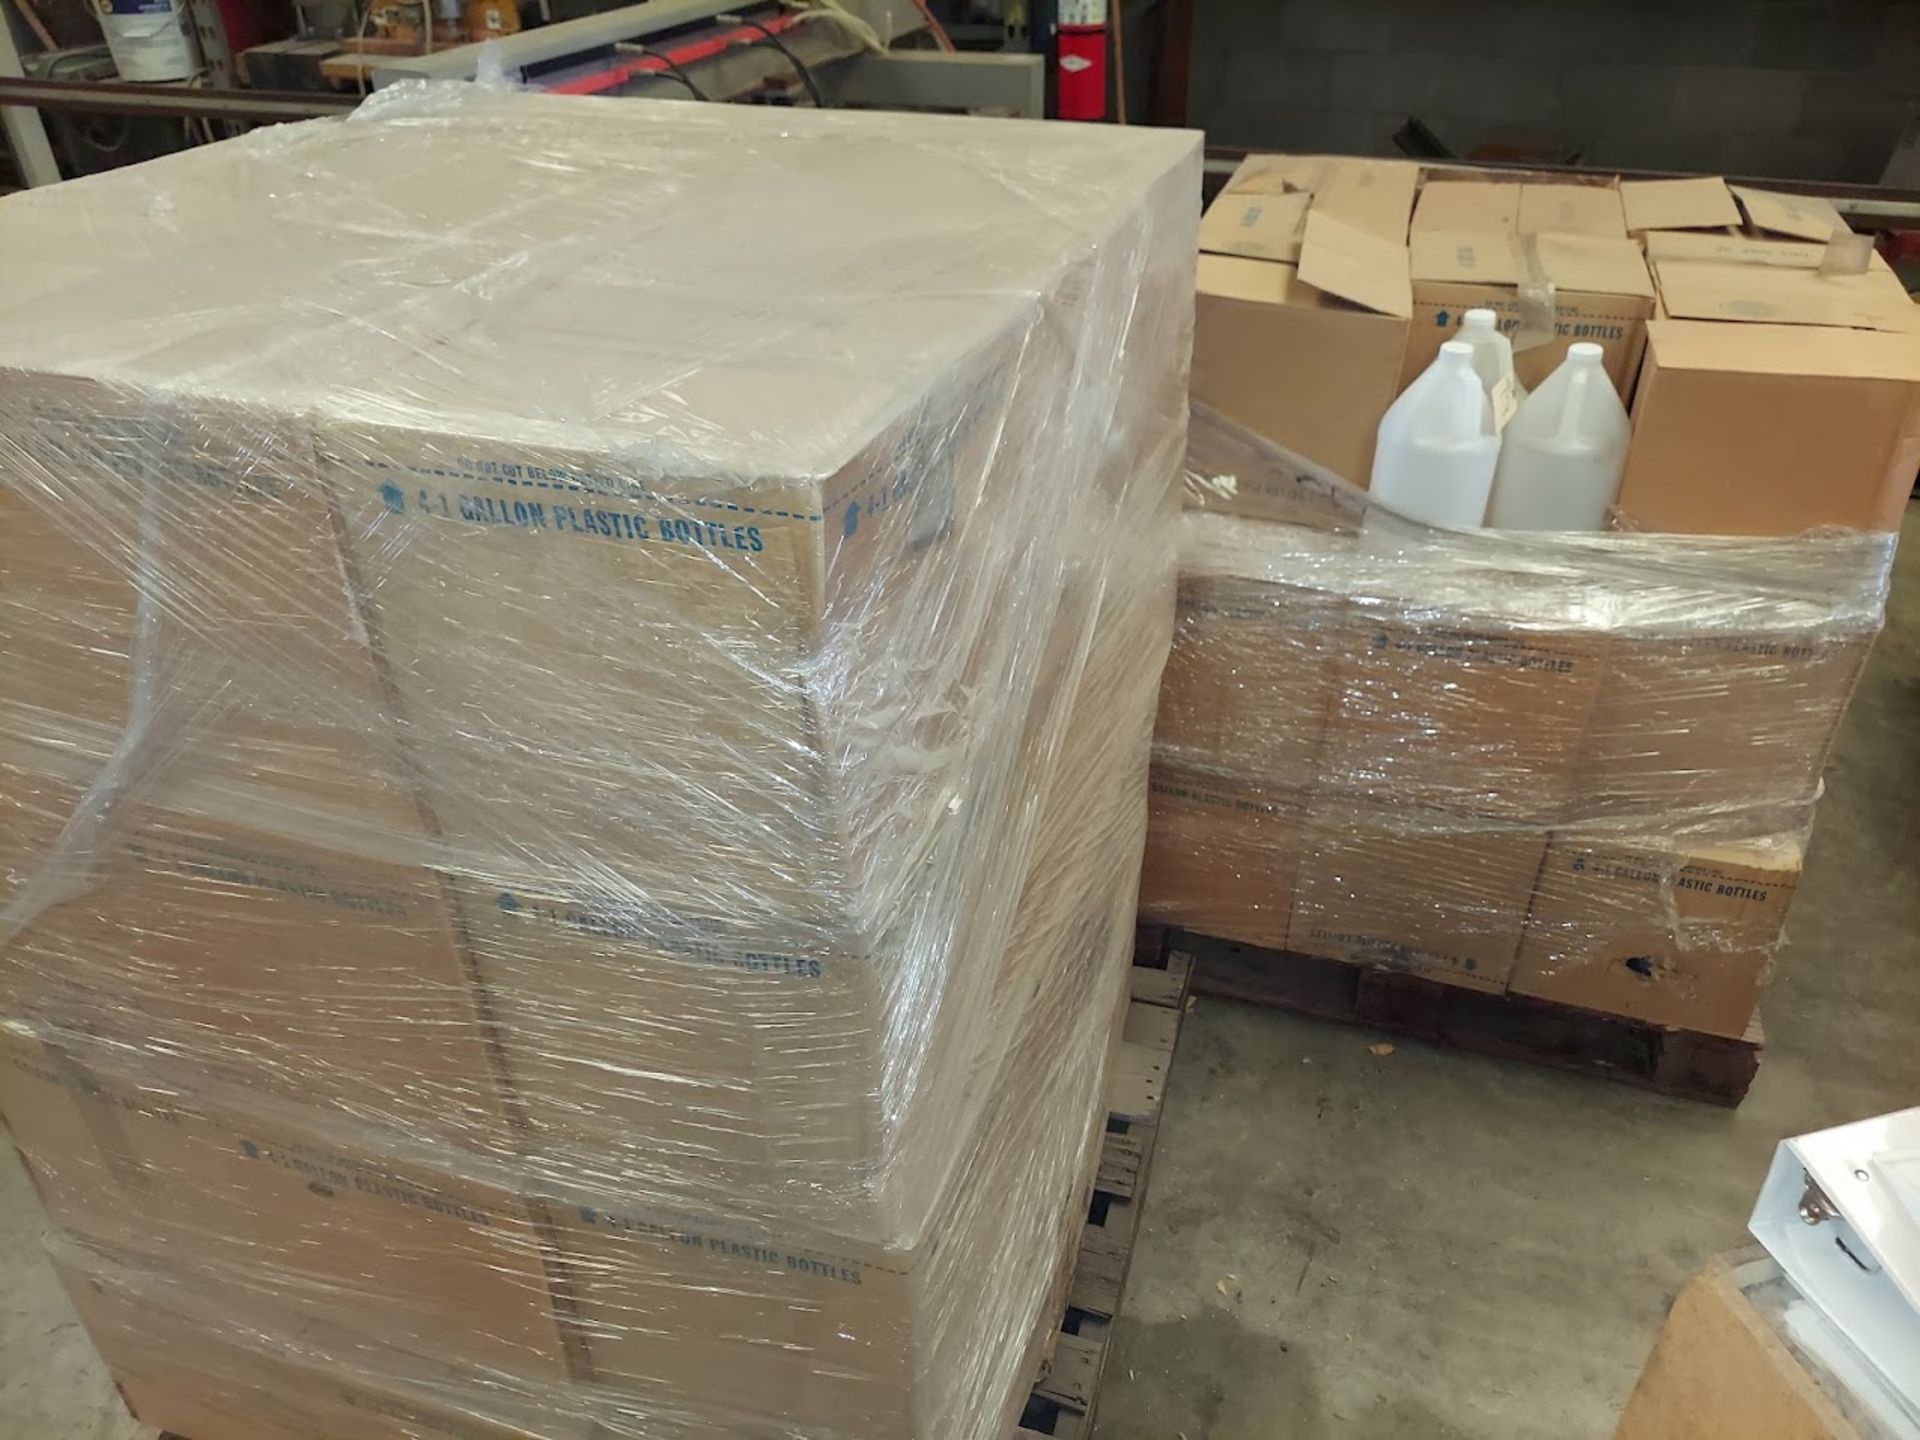 2 - Pallets of New 1 Gallon Plastic Bottles with Lids